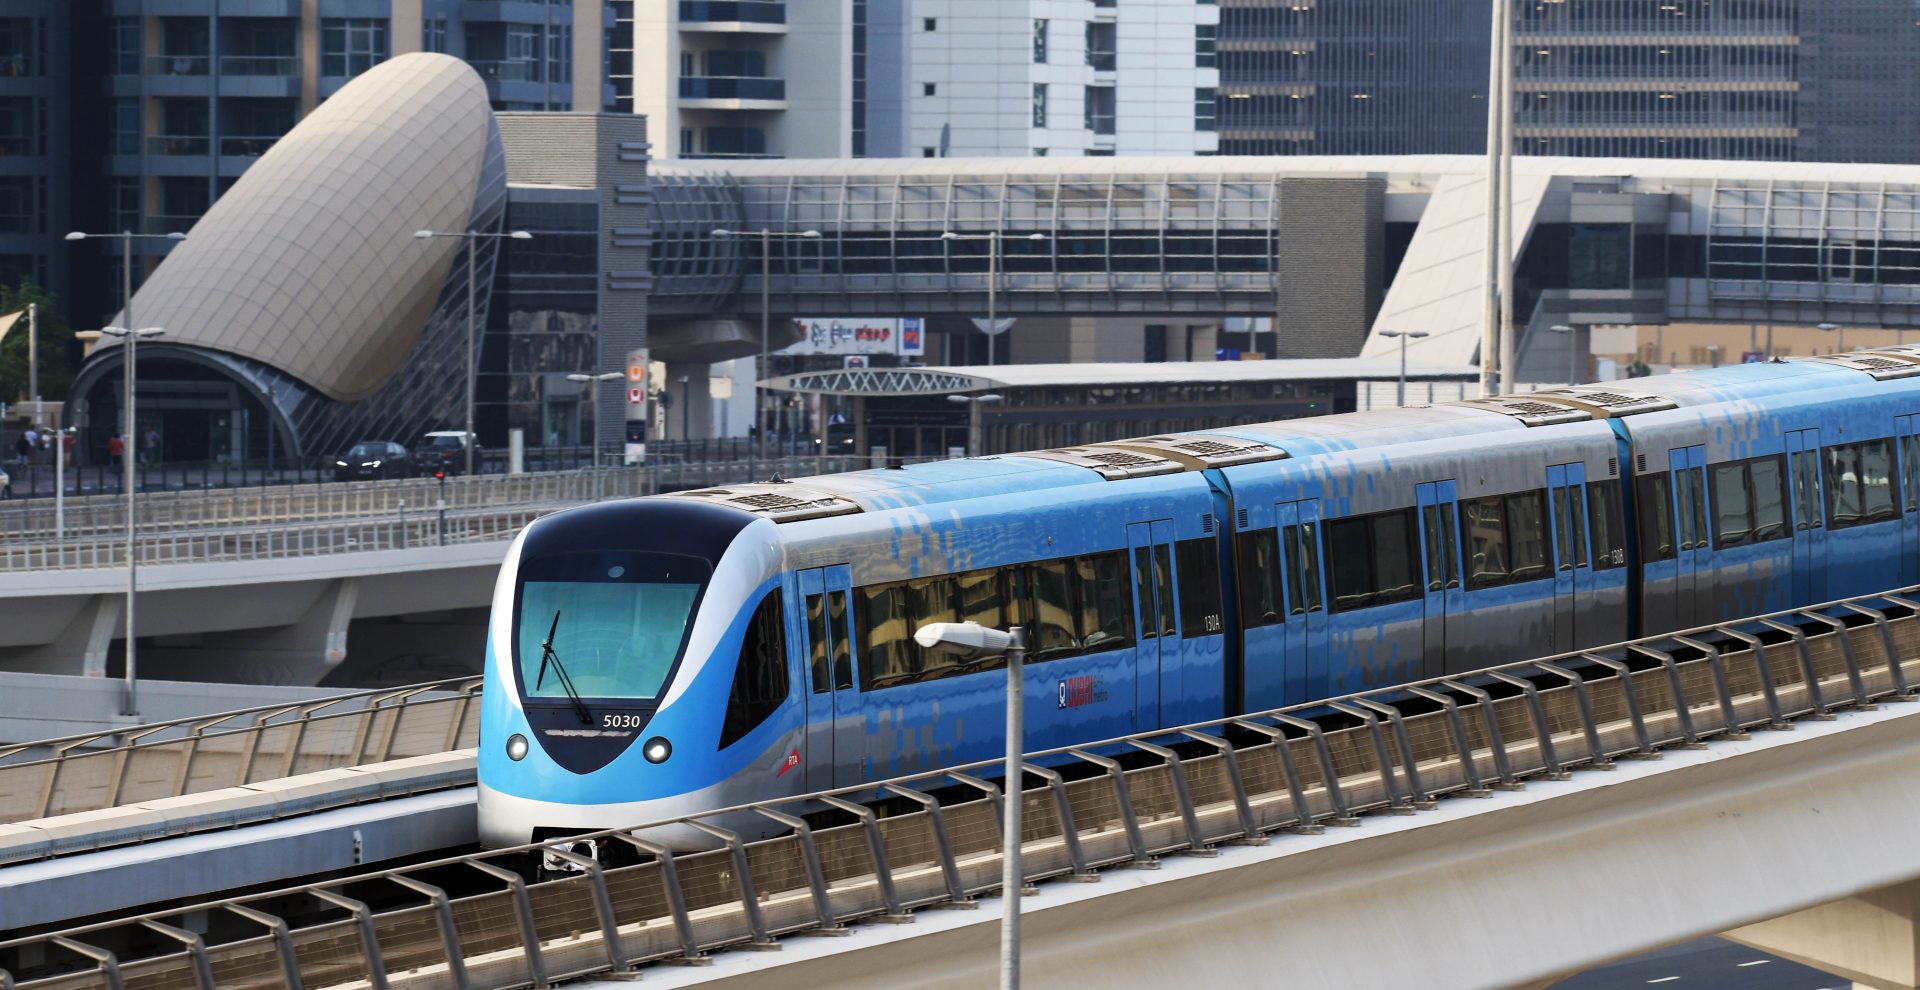 Dubai Metro Blue Line: Where Will It Stop? What's The Route?